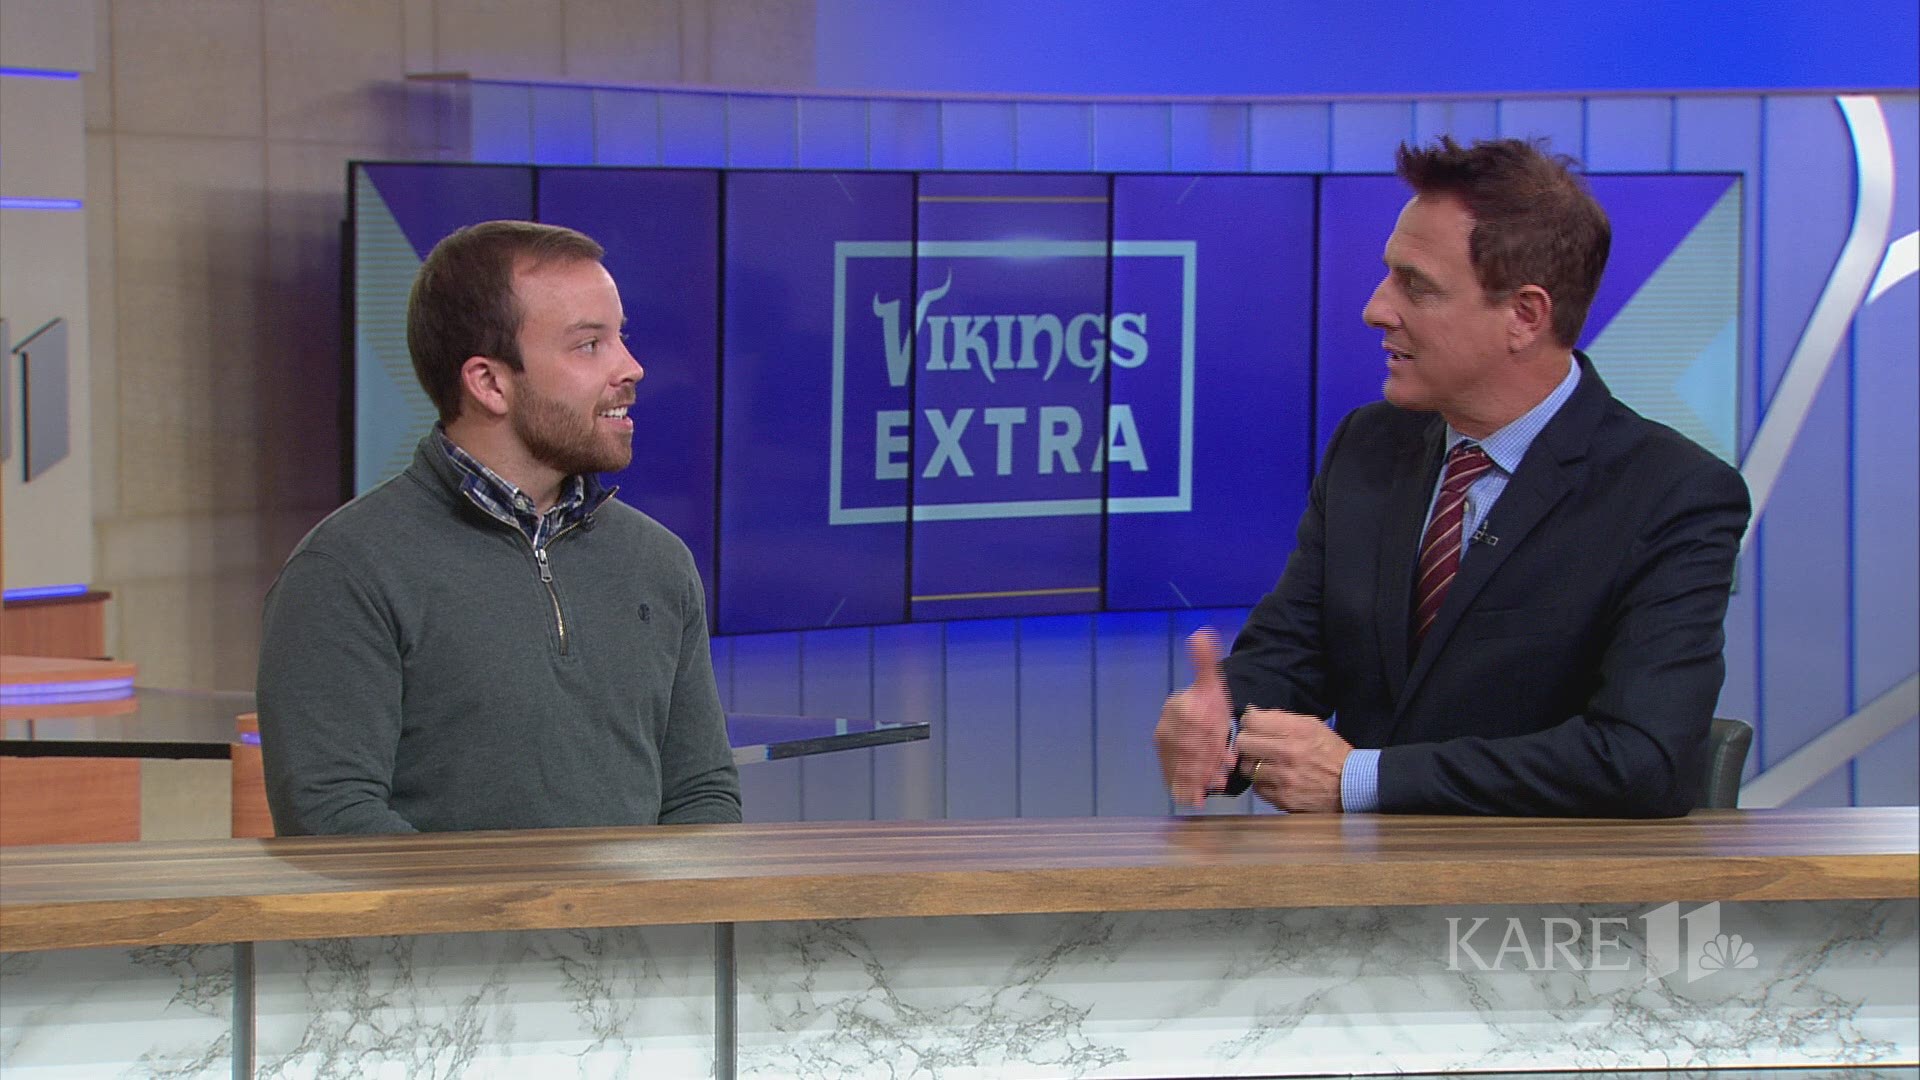 KARE 11 Sports Director Eric Perkins discussed the Vikings 1-2-1 record with Star Tribune writer Andrew Krammer.